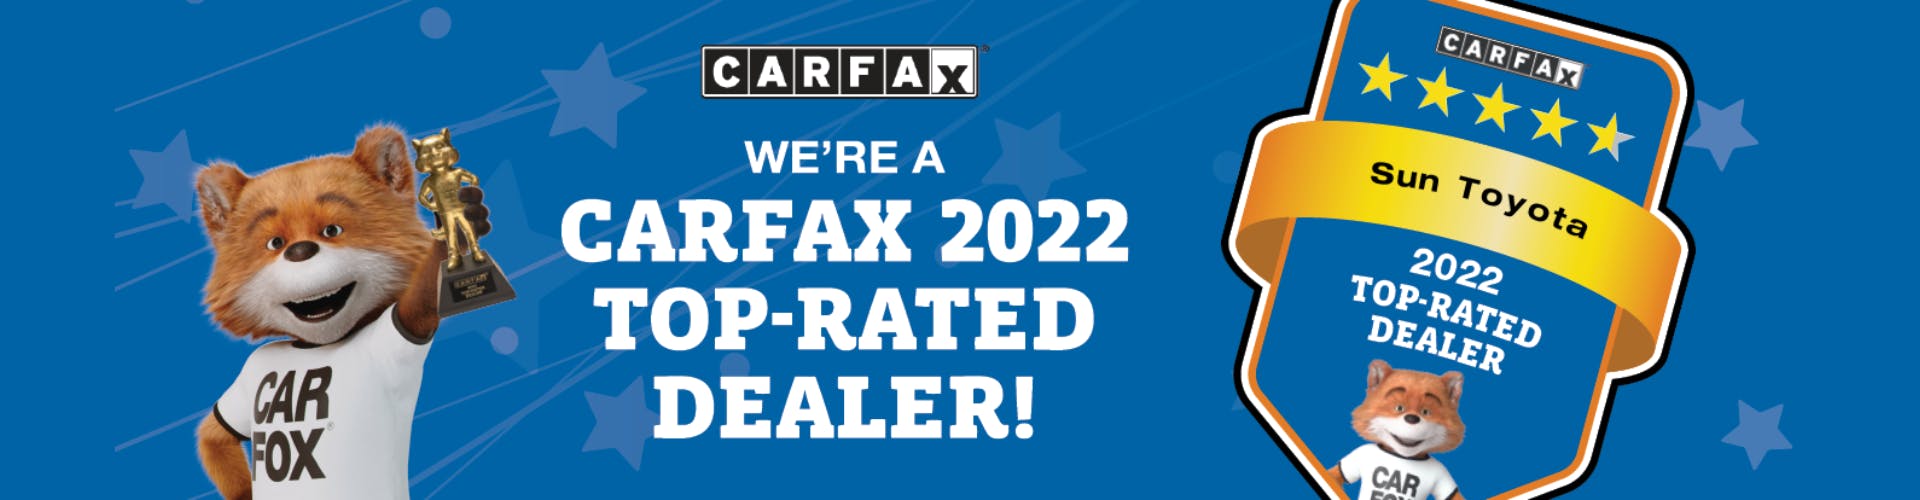 zCarfax Top Rated Dealer